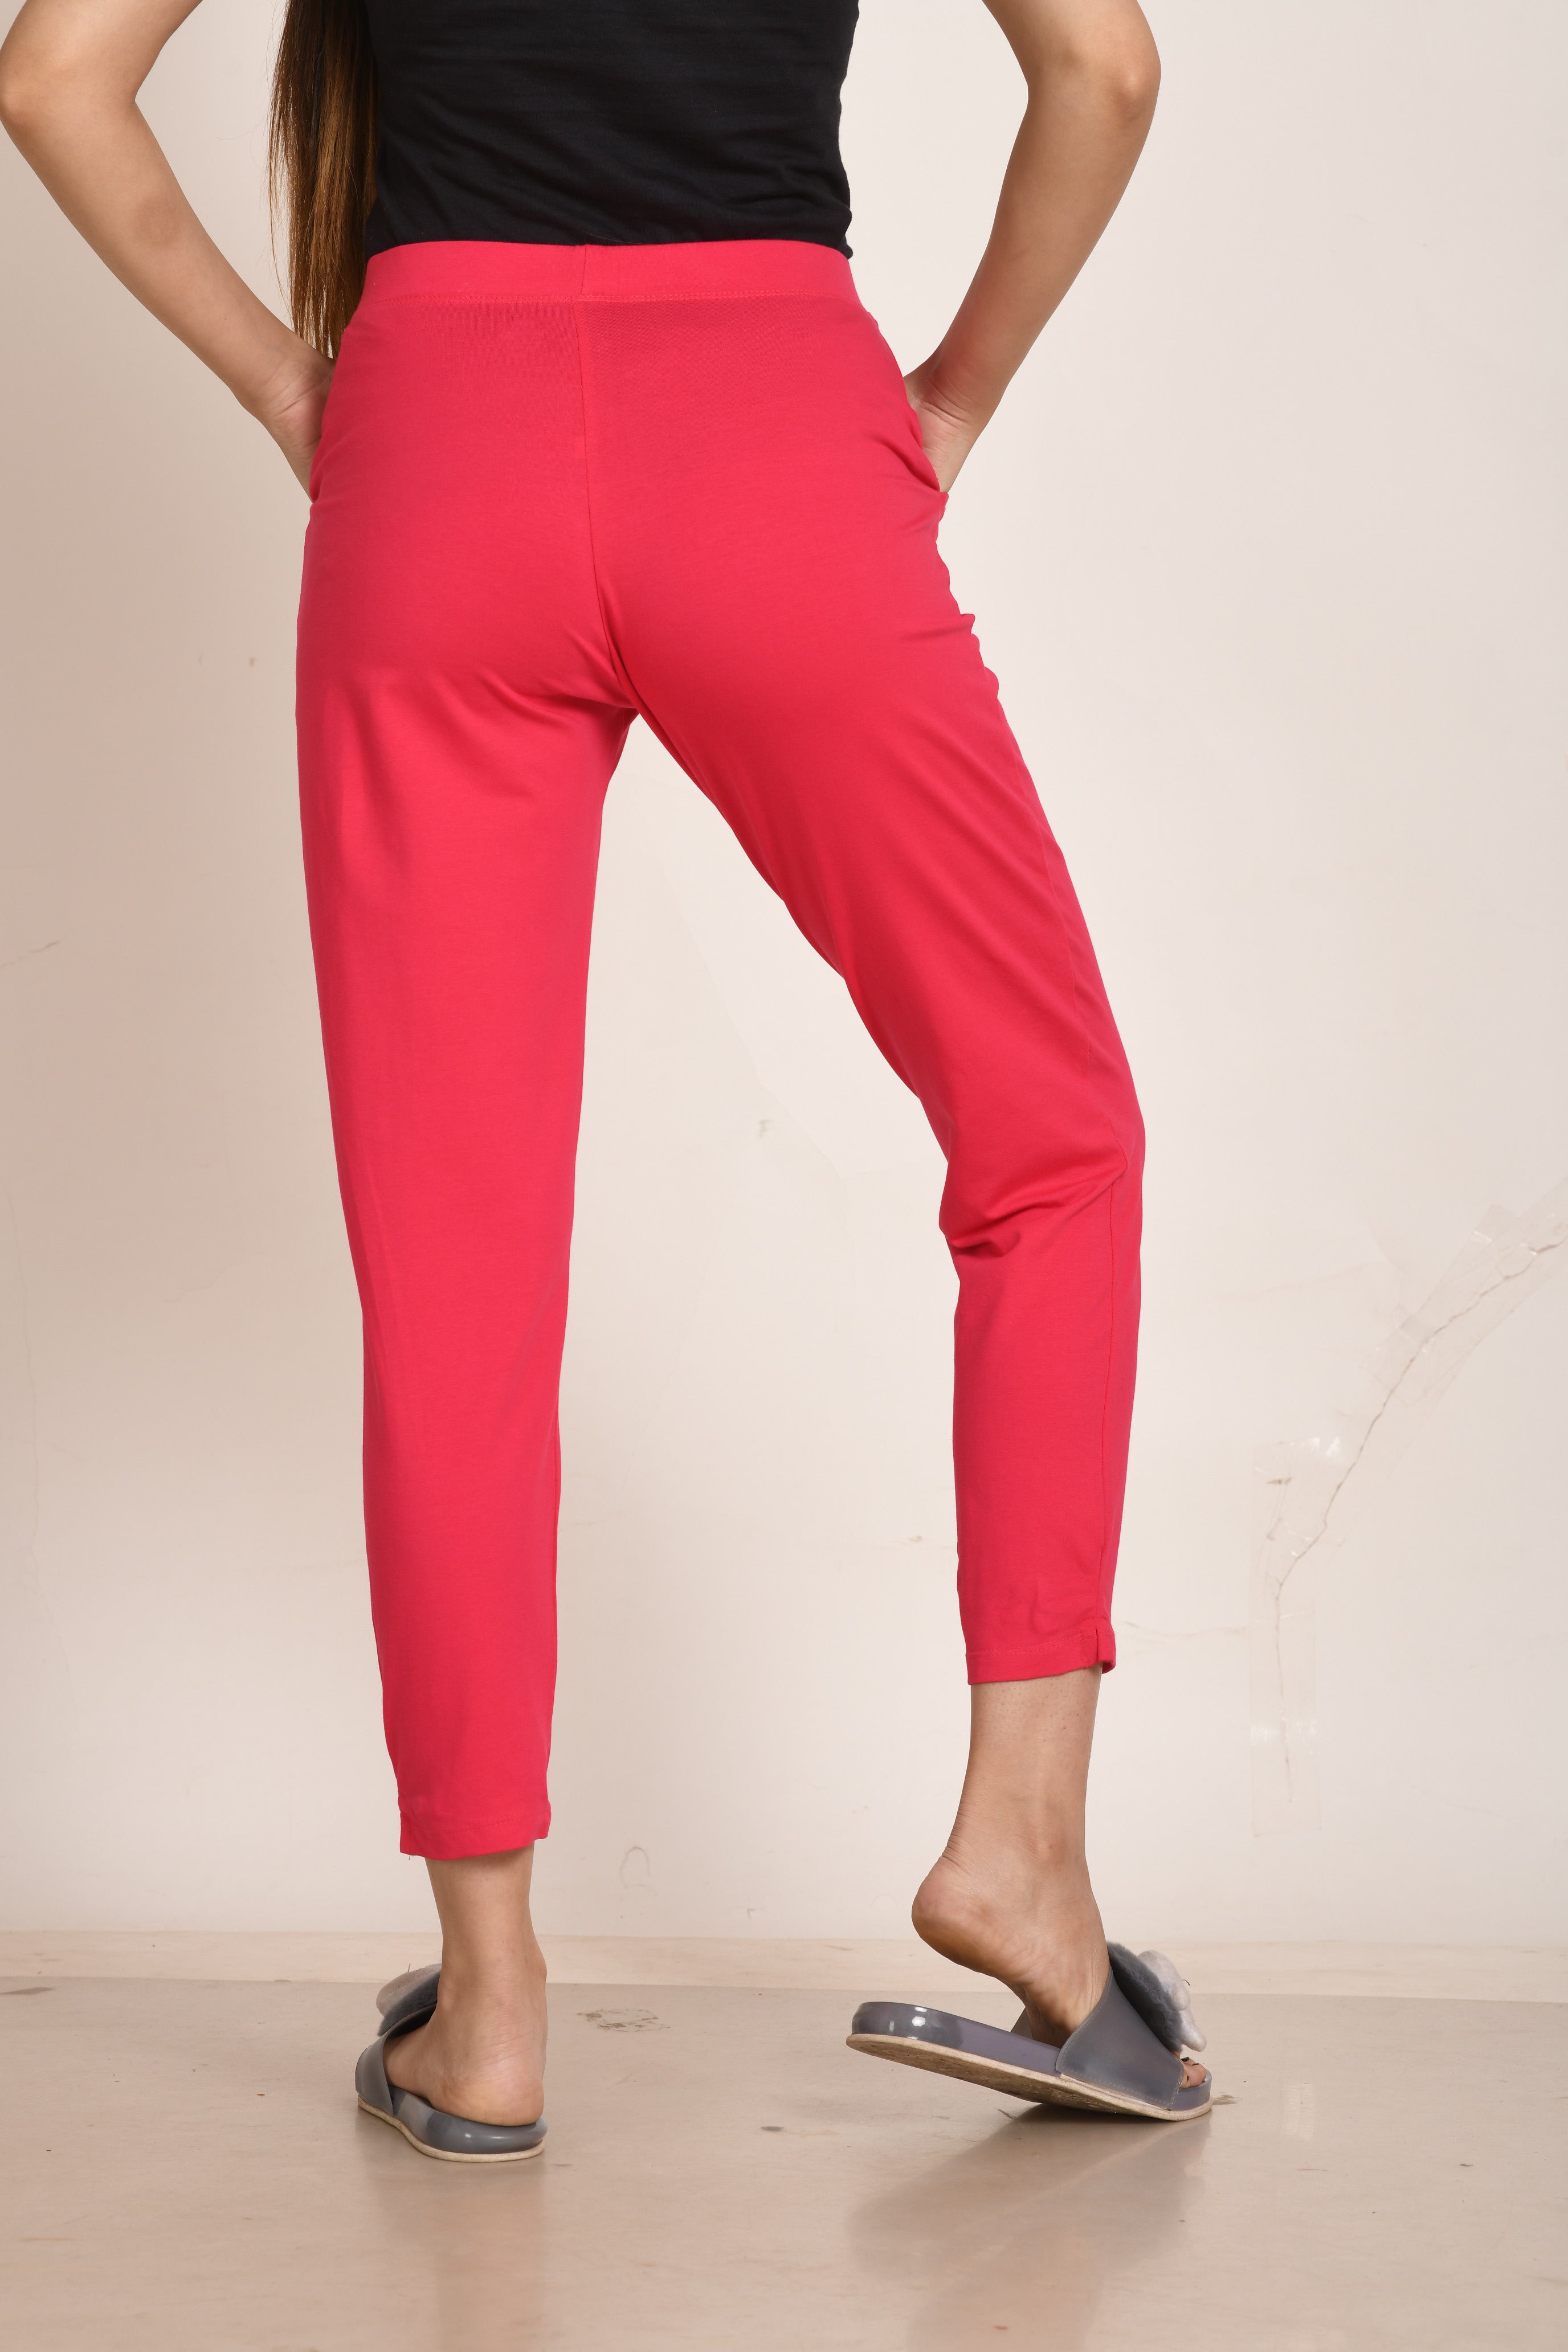 Buy Red Straight Pants with Pocket | Wear with Kurta Or Top (Red, XX-Large)  at Amazon.in